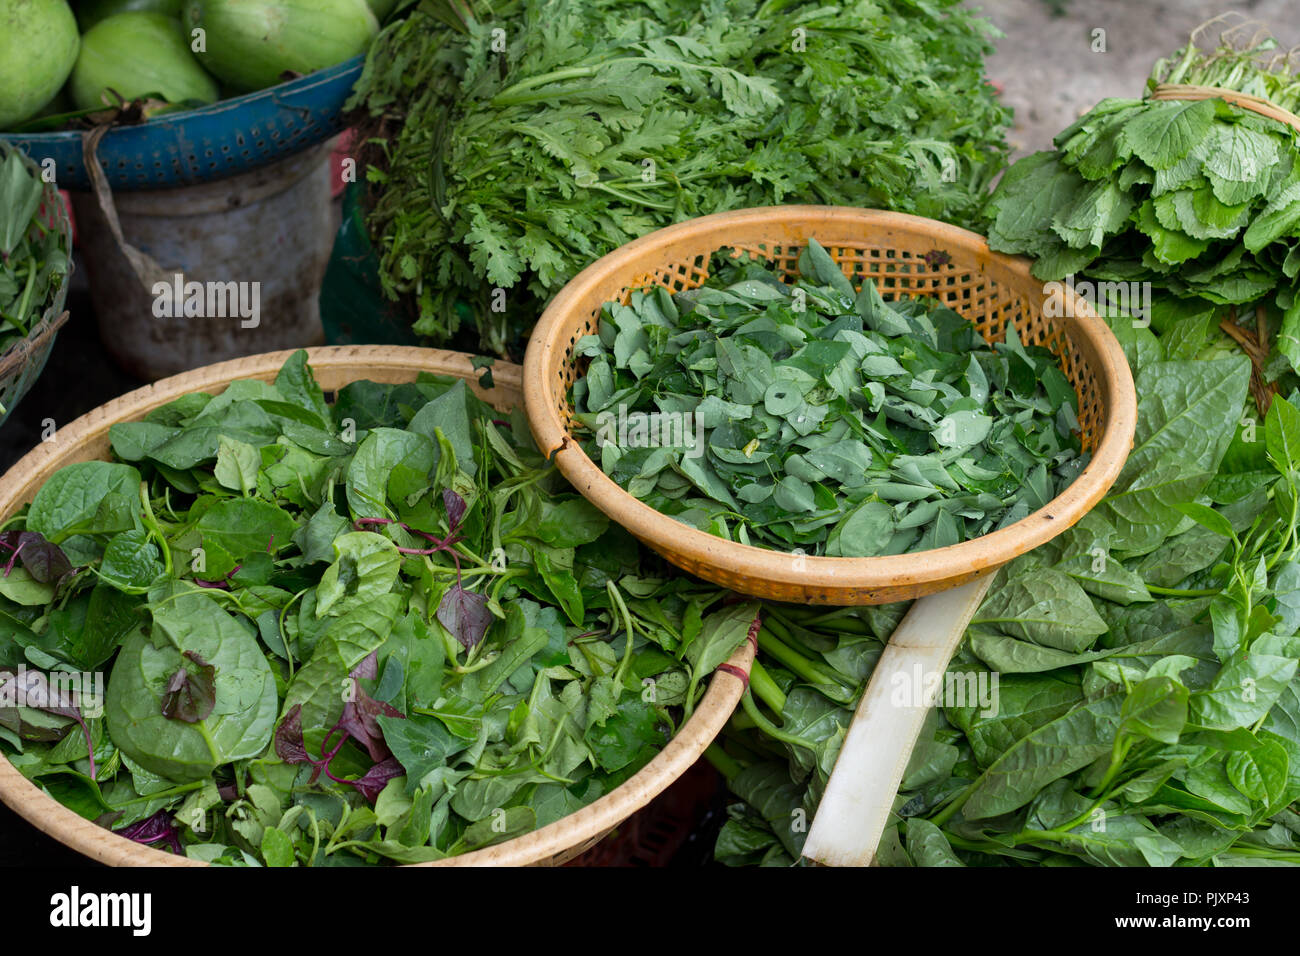 Woven baskets of assorted fresh green herbs Stock Photo